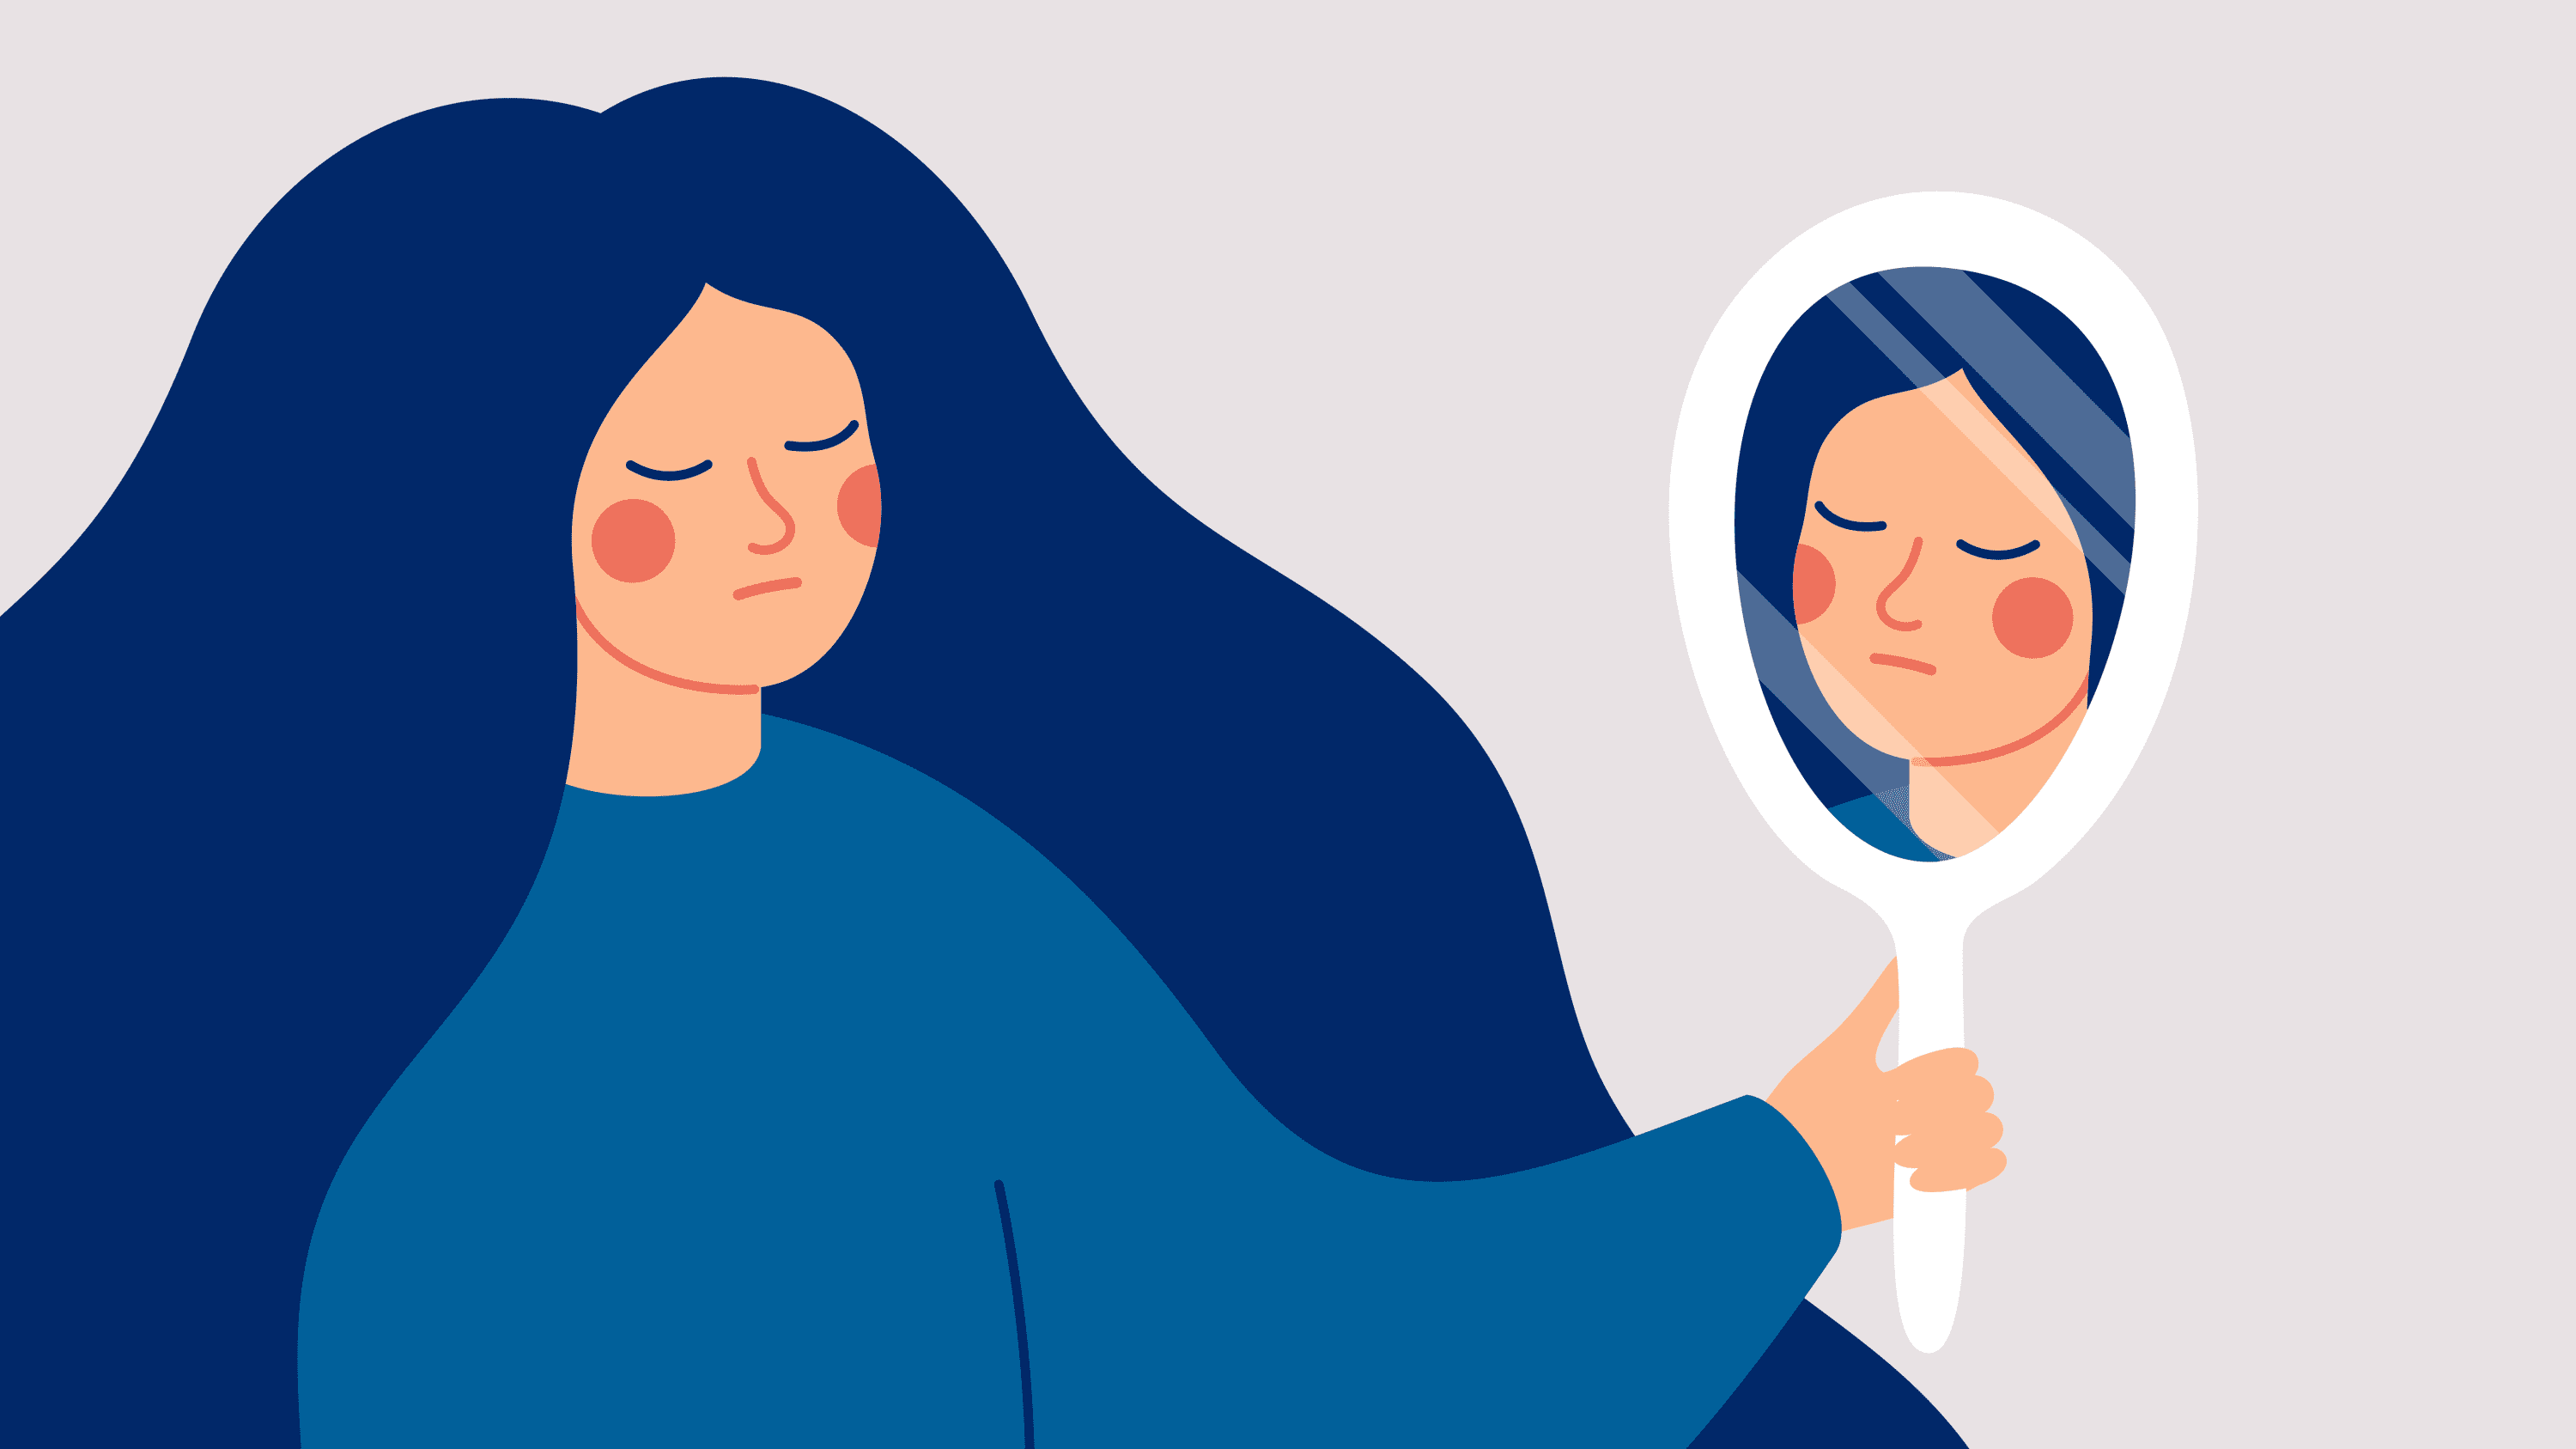 illustration of someone looking unhappily at their reflection in a mirror, perhaps because of an eating disorder